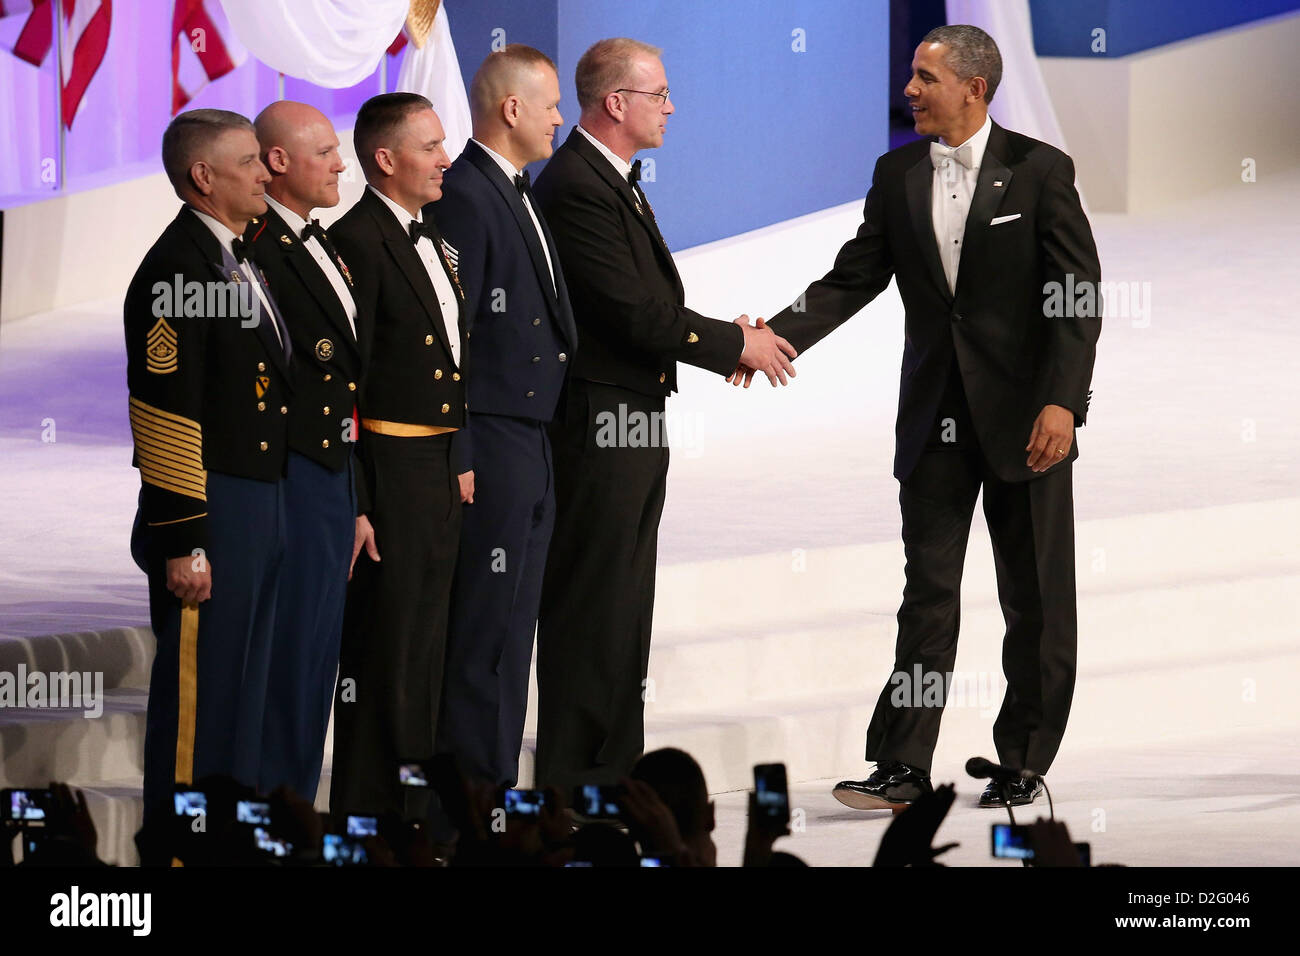 Washington DC, USA. 21st January 2013. United States President Barack Obama (R) thanks (L-R) Sergeant Major of the Army Raymond Chandler, Sergeant Major of the Marine Corps Micheal Barrett, Master Chief Petty Officer of the Navy Michael Stevens, Chief Master Sergeant of the Air Force James Roy and Master Chief Petty Officer of the Coast Guard Michael Leavitt during the Commander-In-Chief Ball at the Walter Washington Convention Center January 21, 2013 in Washington, DC. President Obama started his second term by taking the Oath of Office earlier in the day during a ceremony on the West Front o Stock Photo